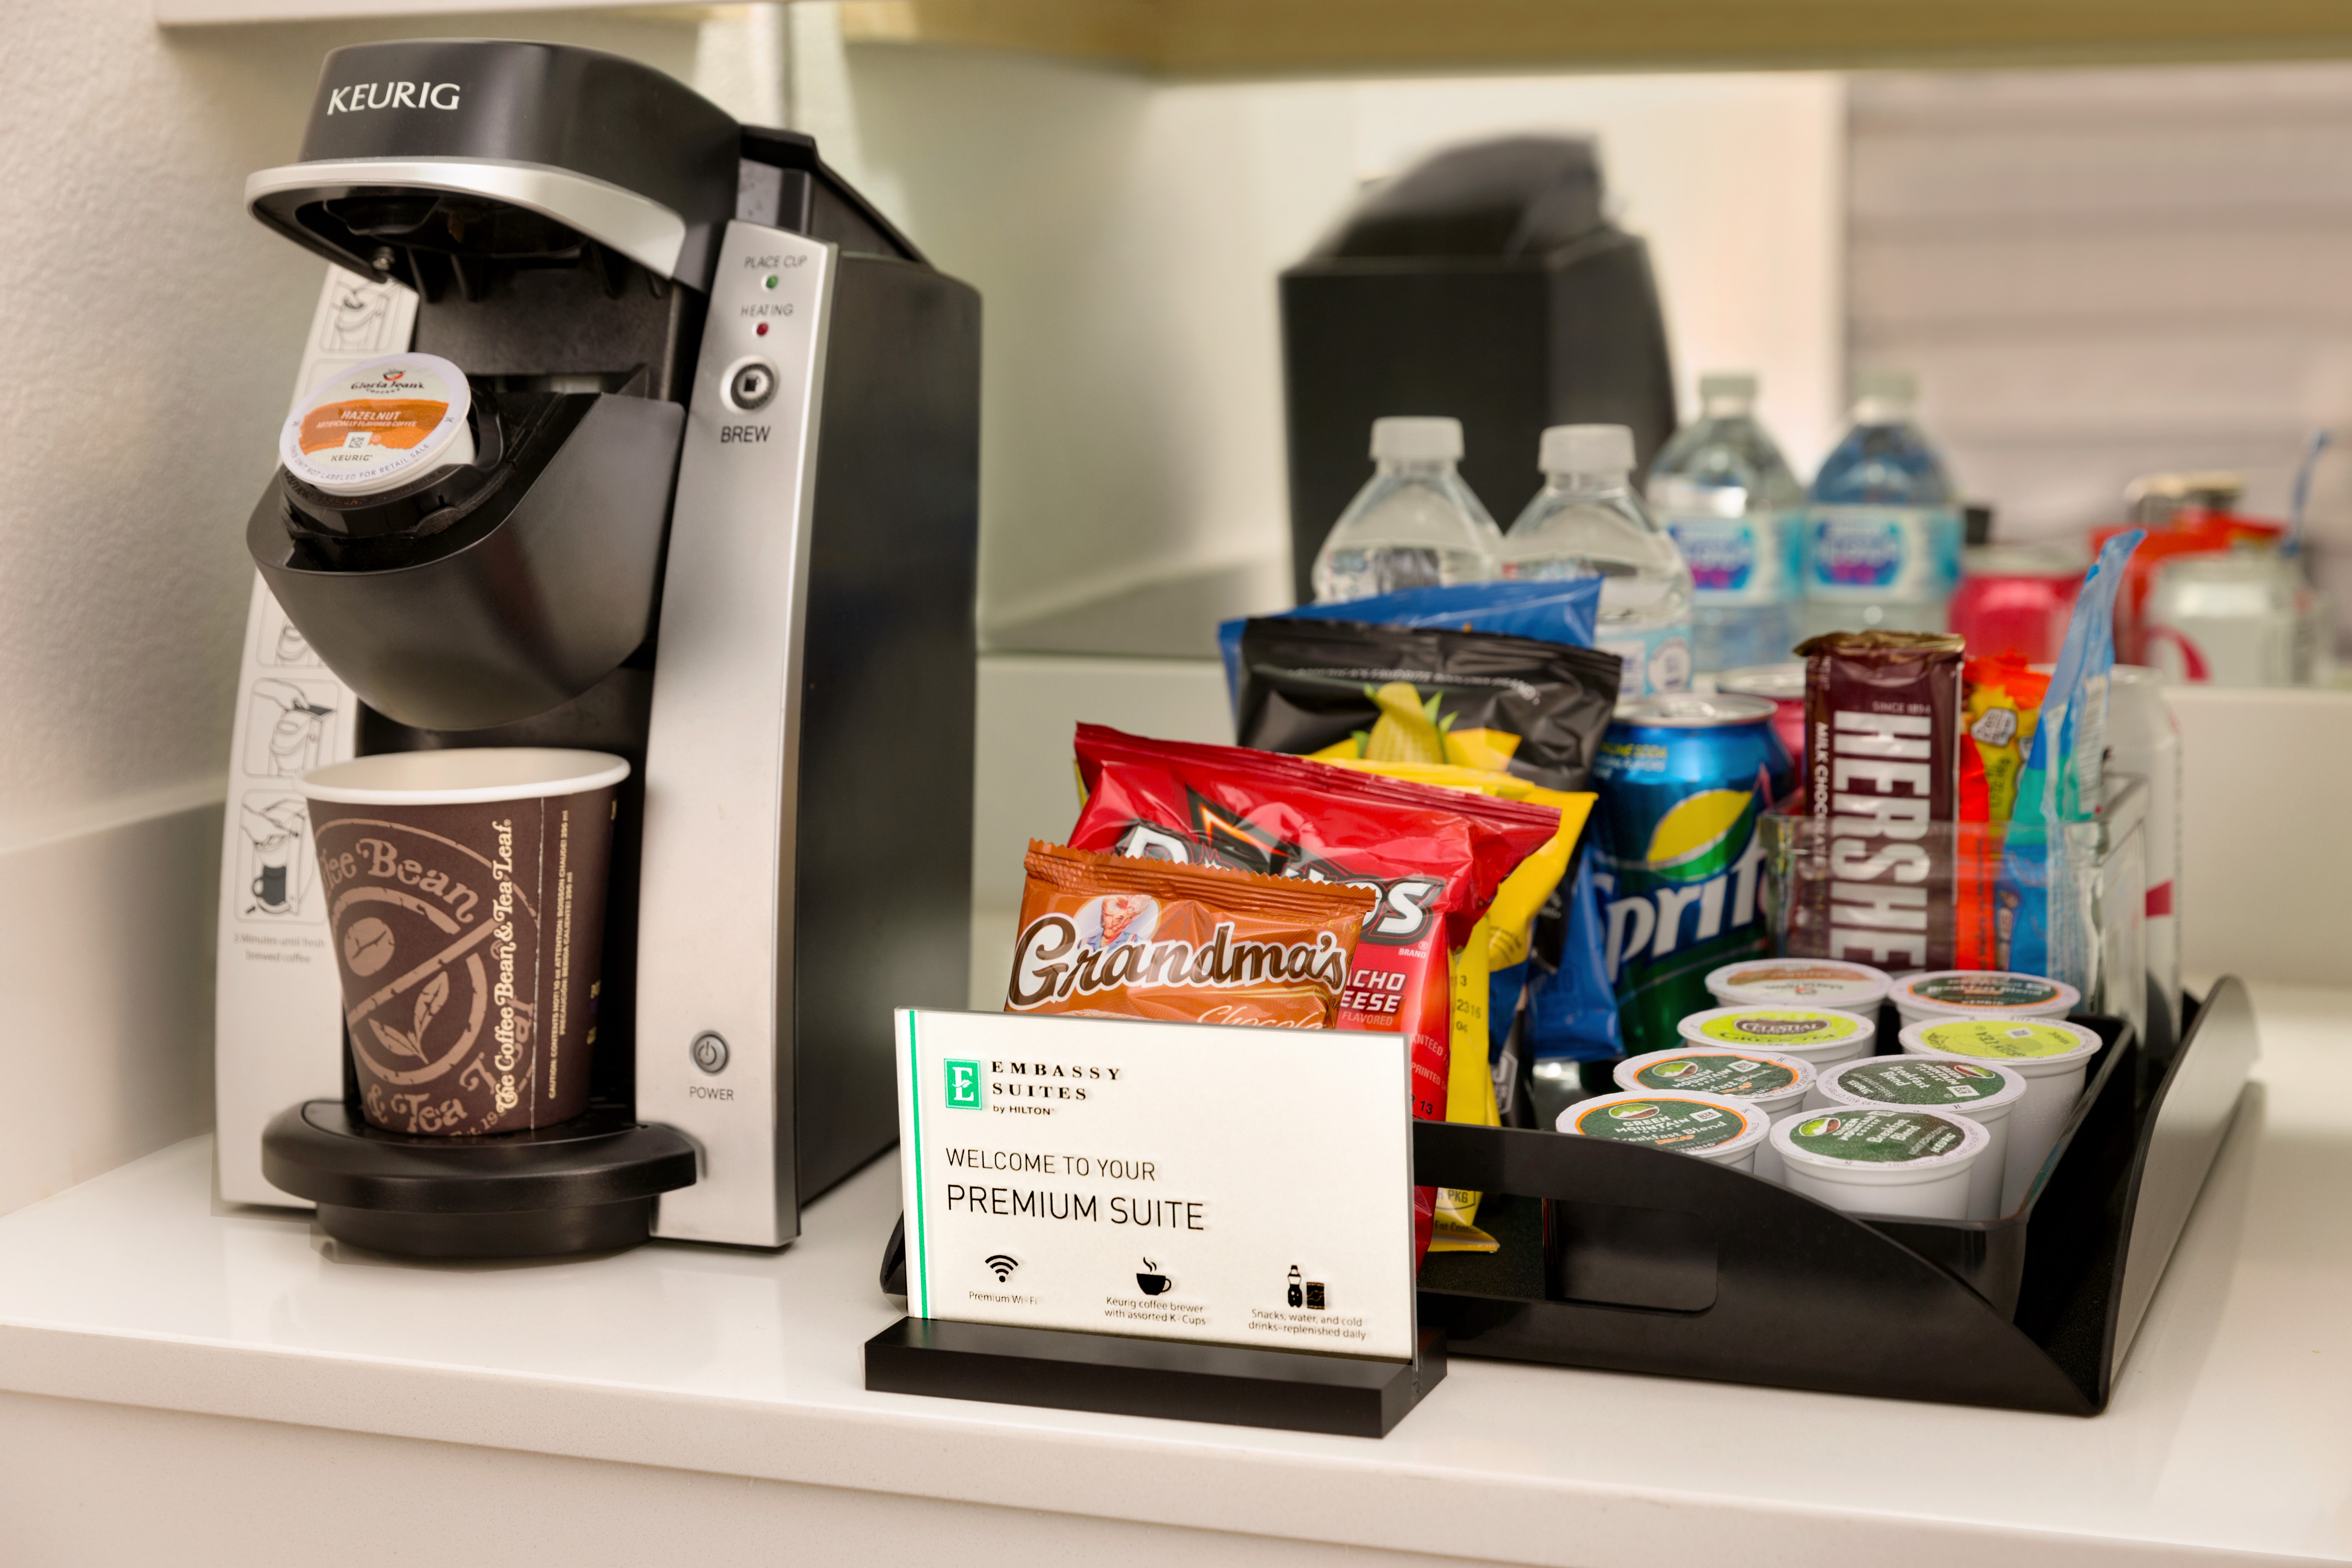 Detailed View of Keurig Coffee Maker, Signage, and Premium Suite Snack Tray 